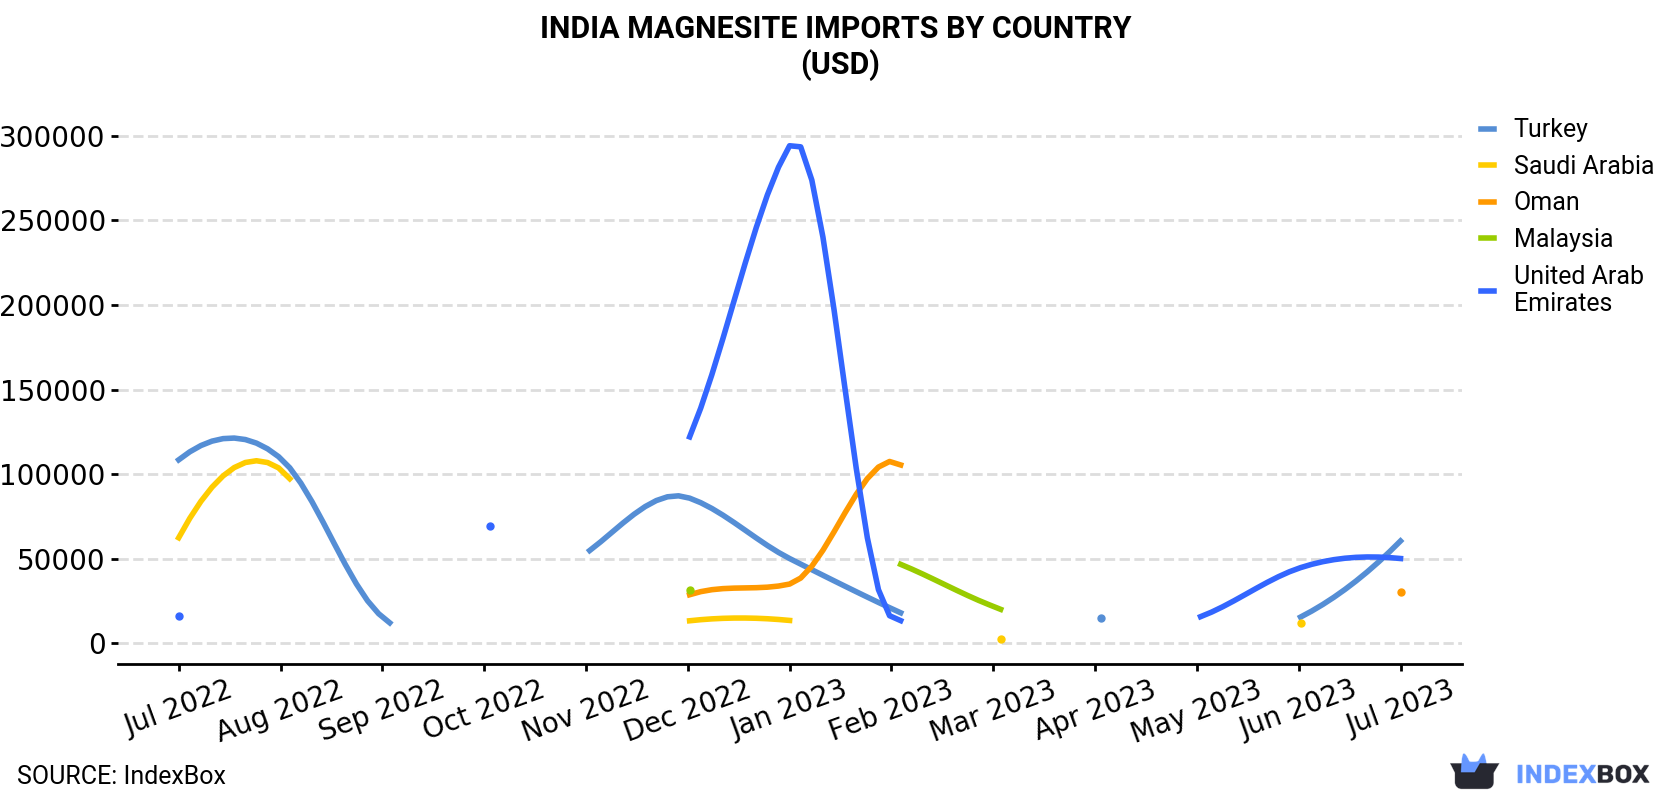 India Magnesite Imports By Country (USD)